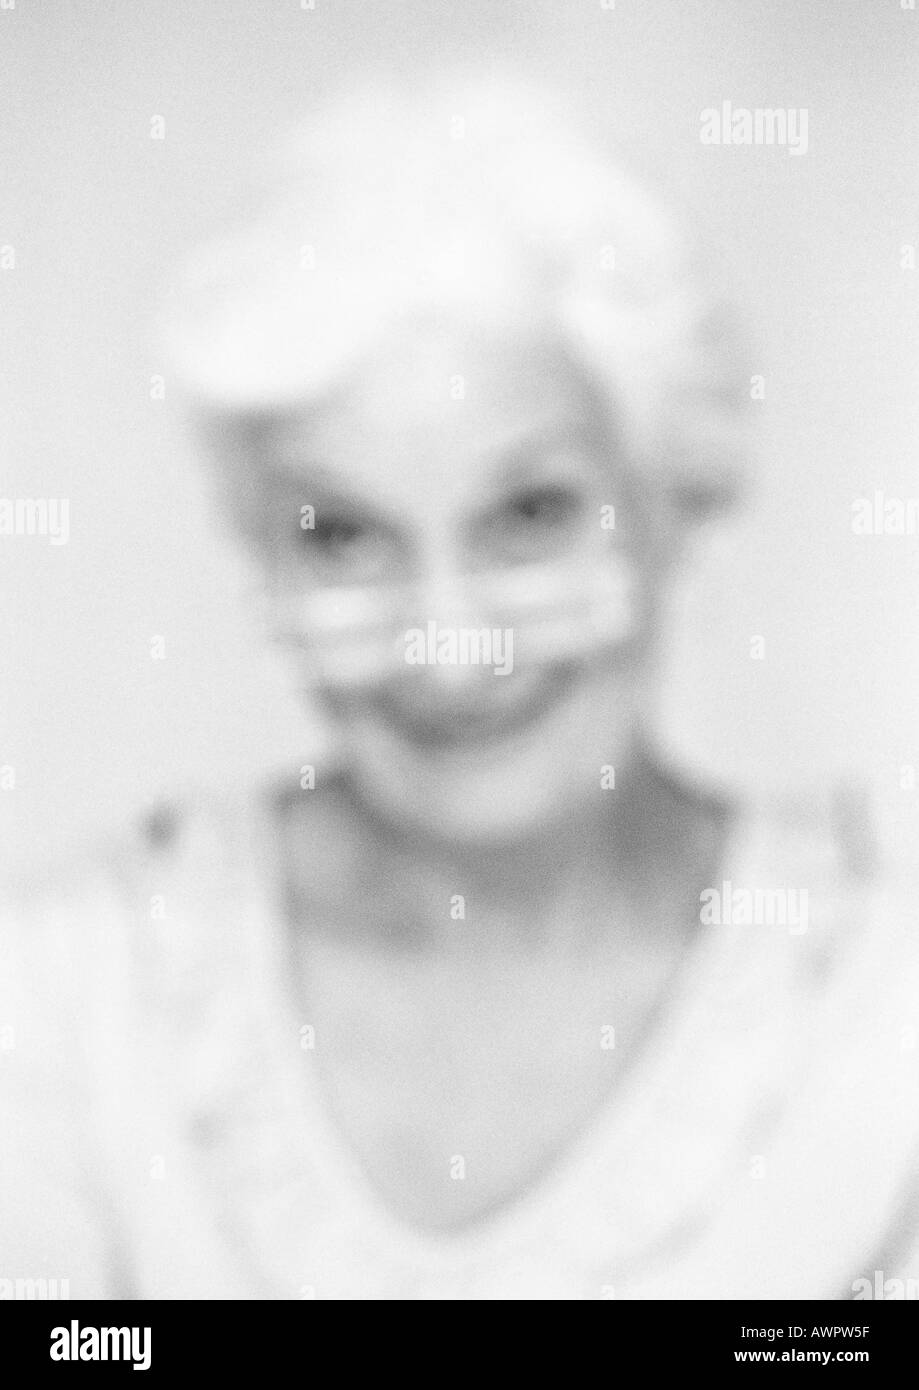 Senior woman looking over edge of glasses, close-up, portrait, blurred, b&w Stock Photo